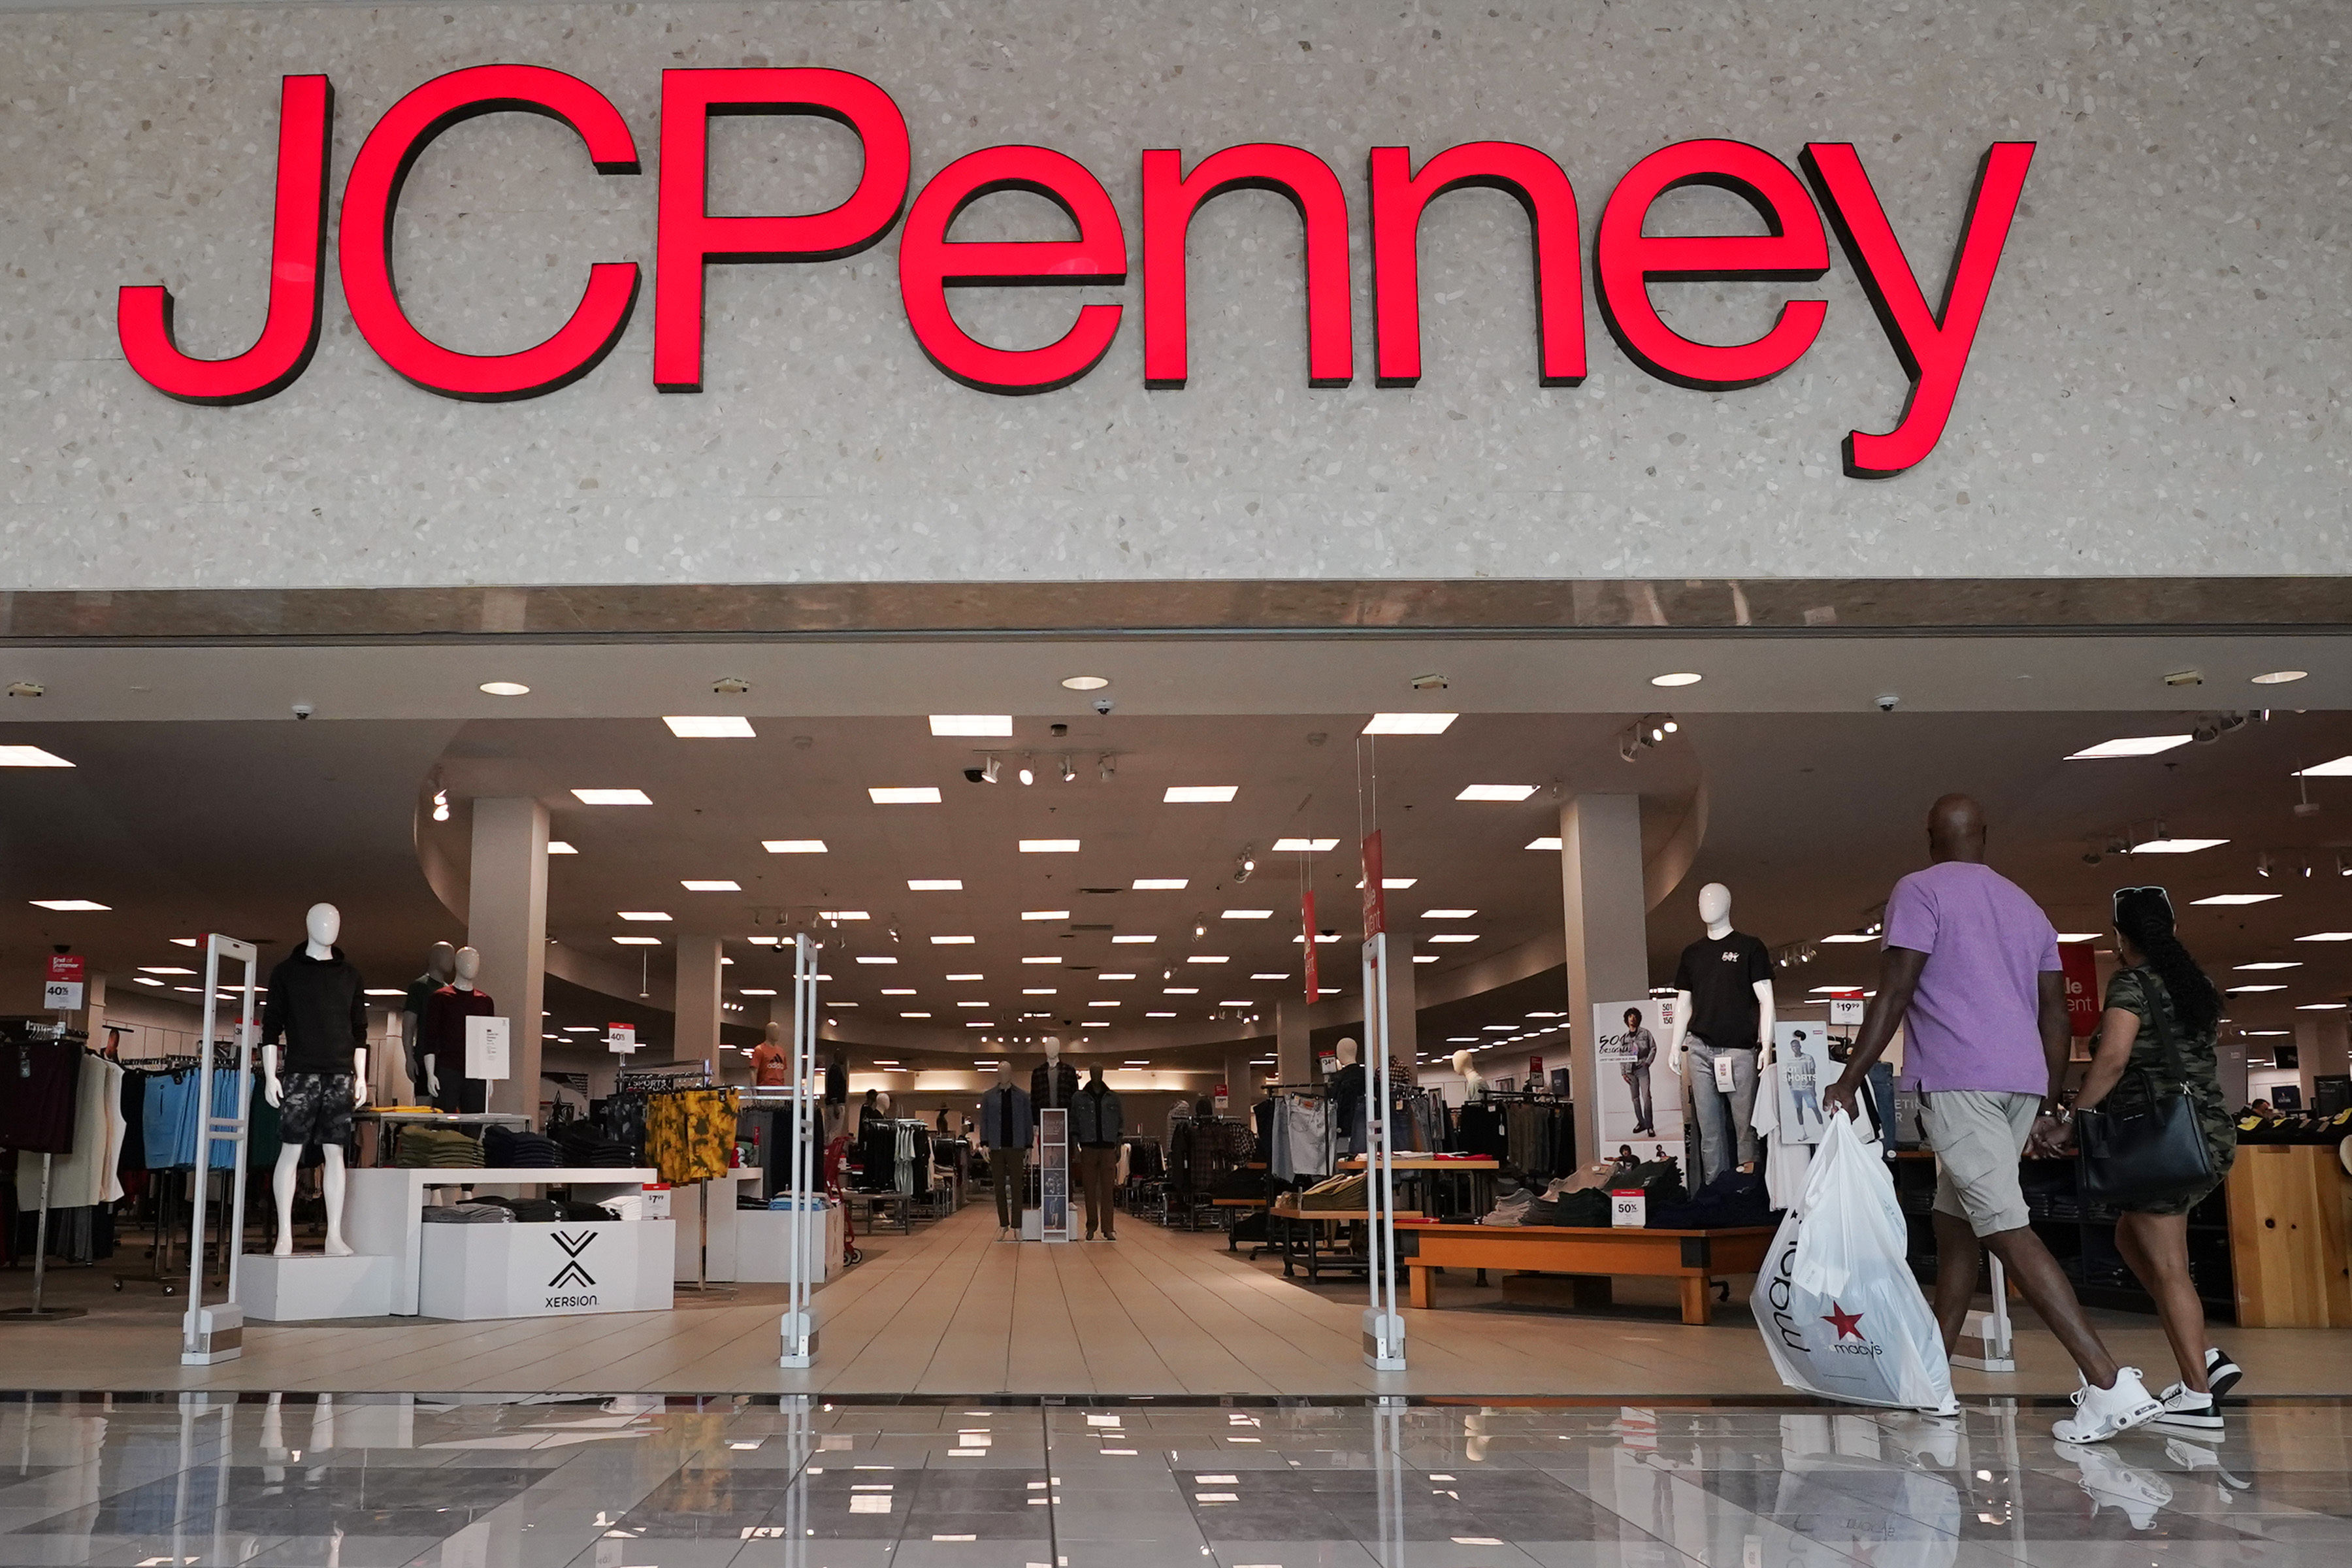 JCPenney Builds Momentum with Multiyear, Self-Funded $1 Billion  Reinvestment Plan and Commitment to Make Every Day and Dollar Count for  Families Across America